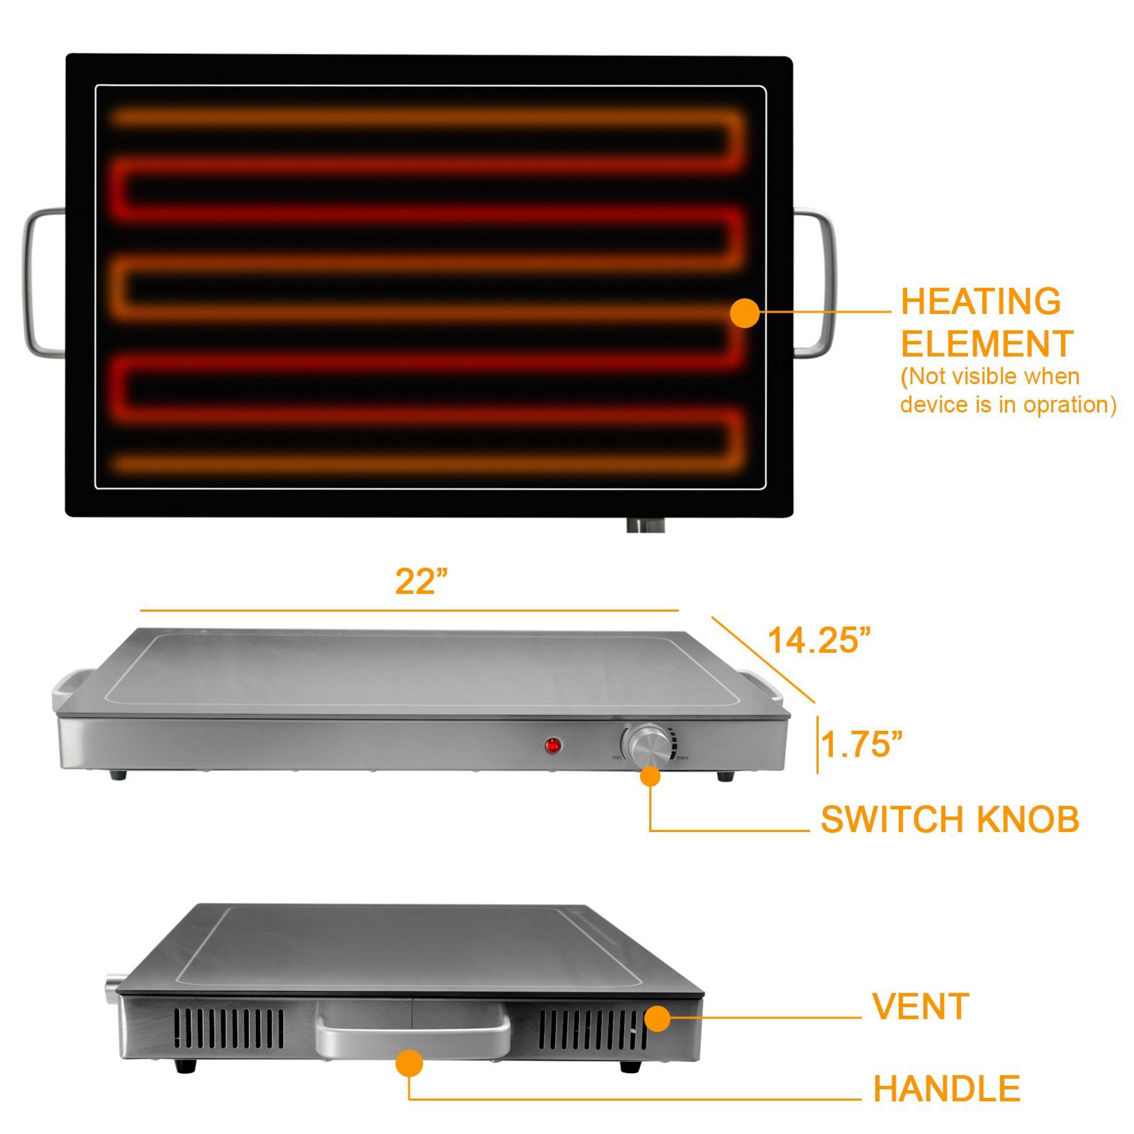 MegaChef Electric Warming Tray, Food Warmer, Hot Plate, With Adjustable Temperat - Image 5 of 5